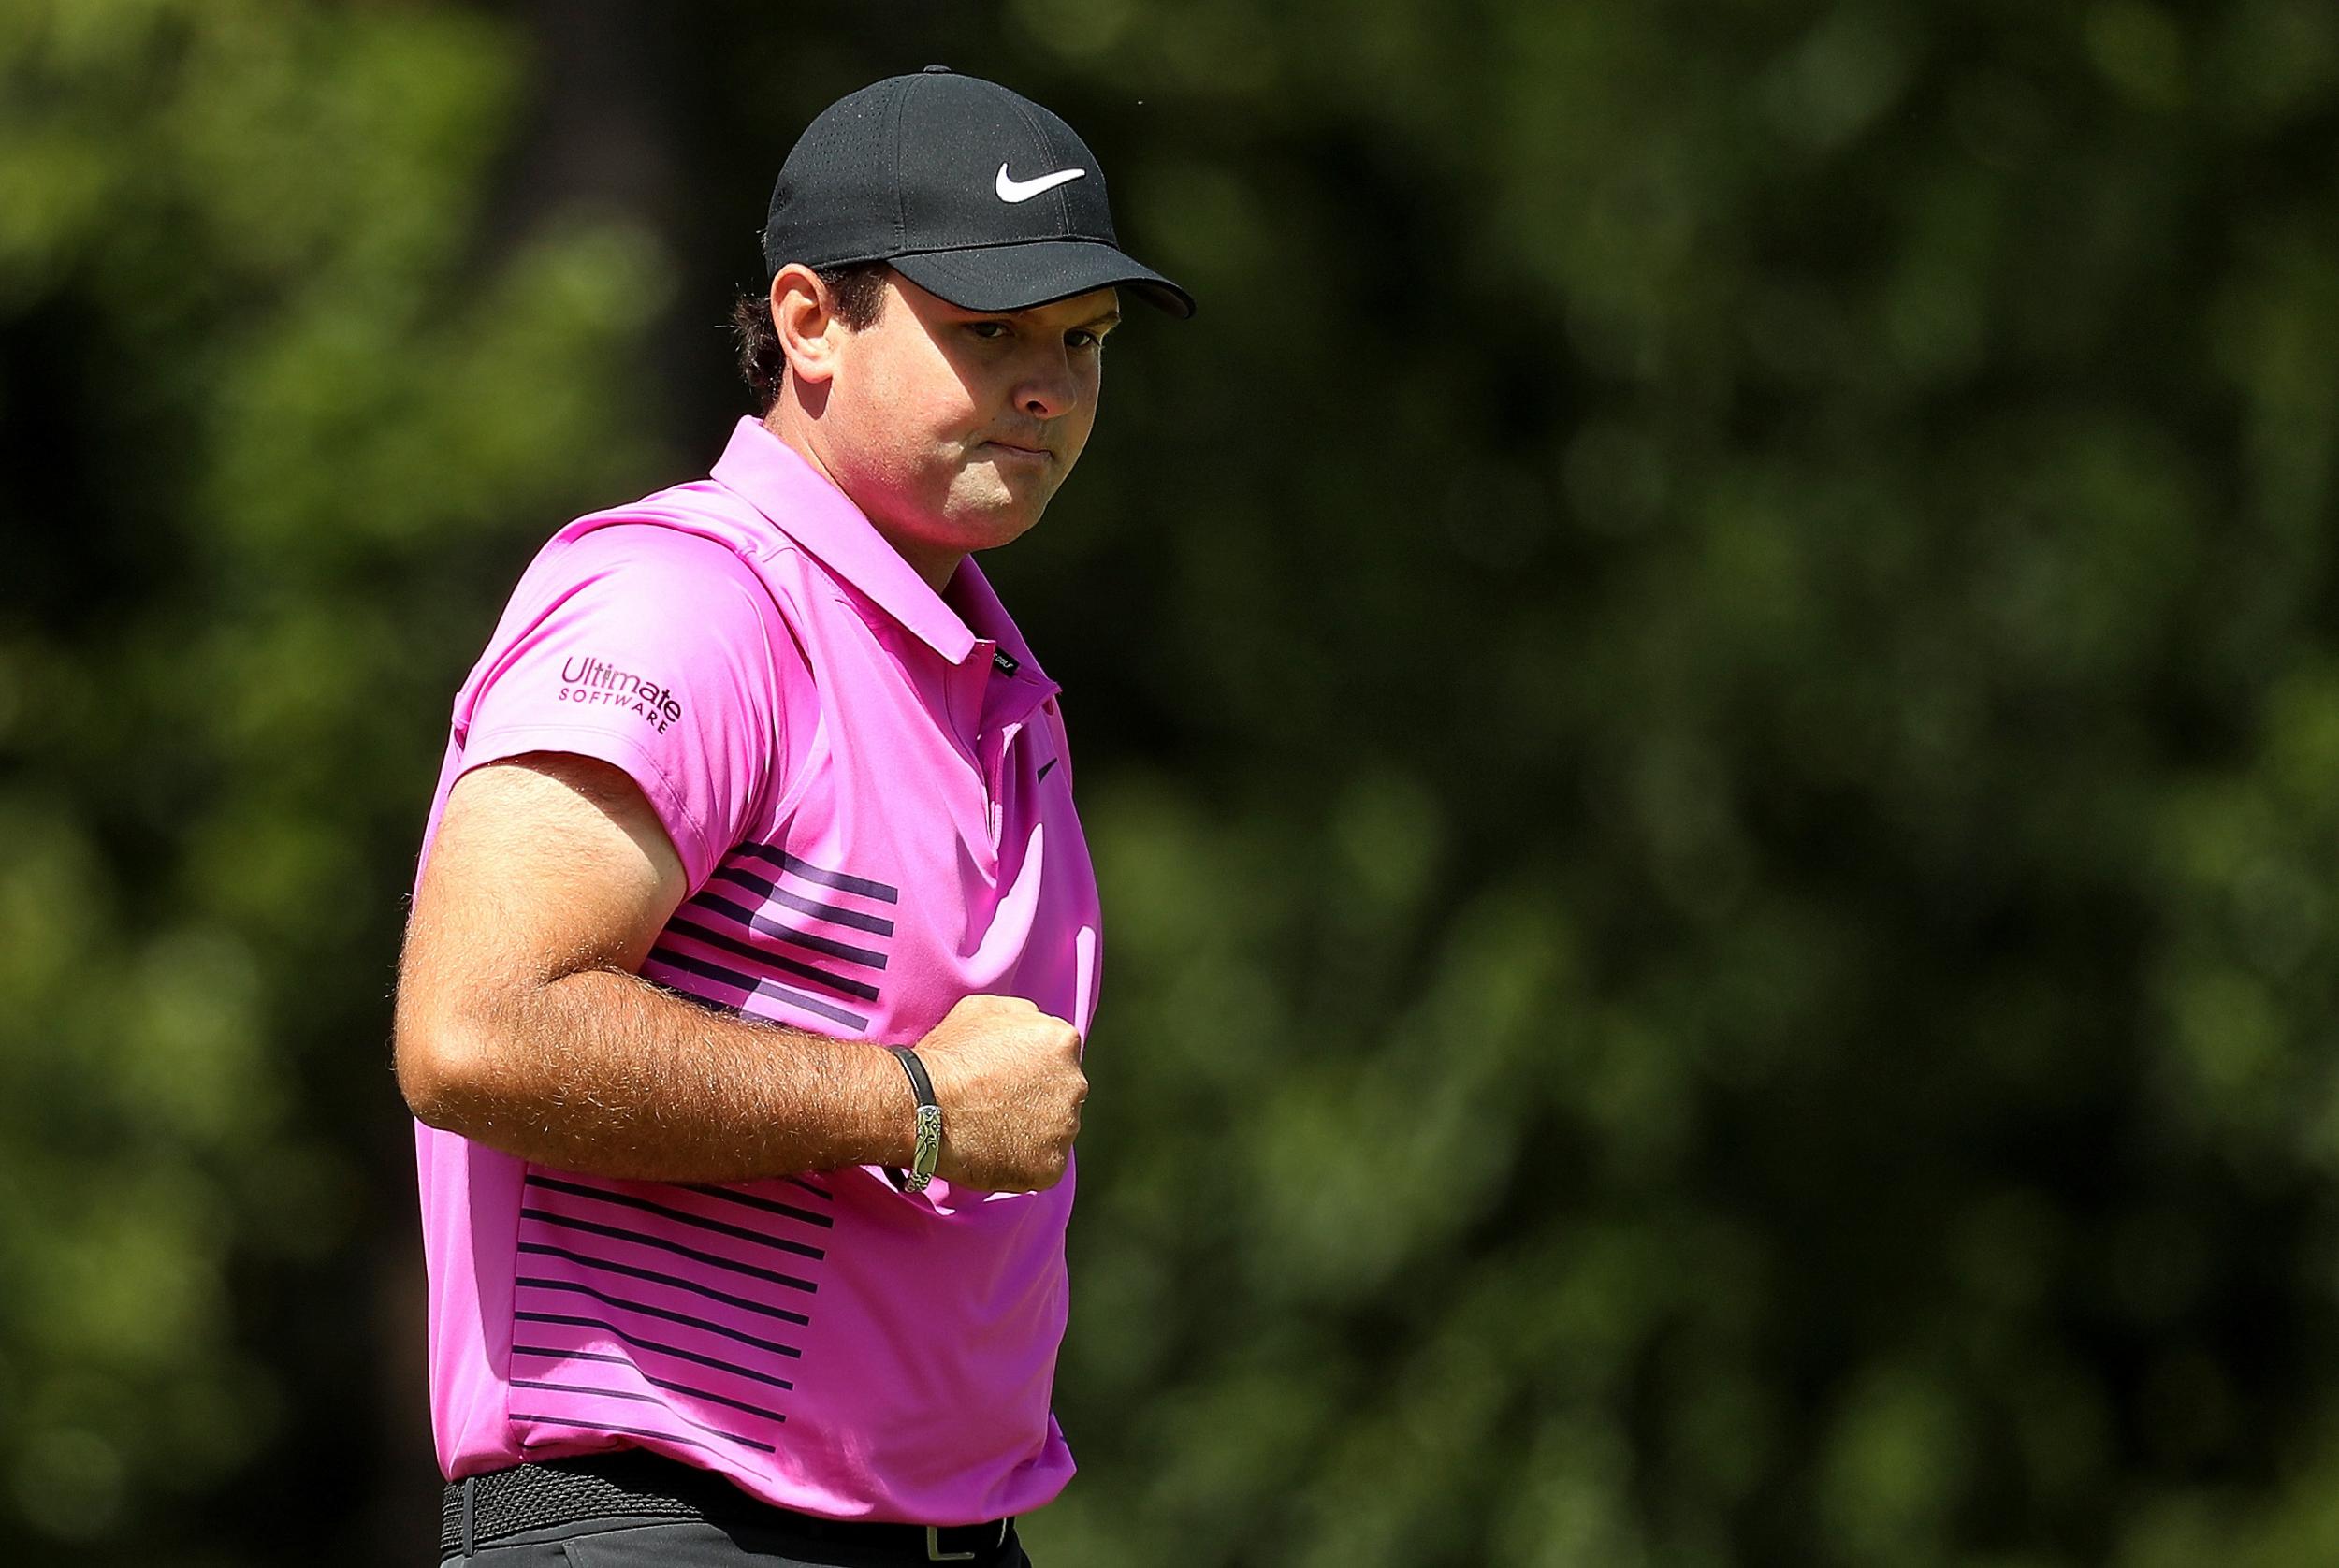 Patrick Reed clinched the Masters by one stroke